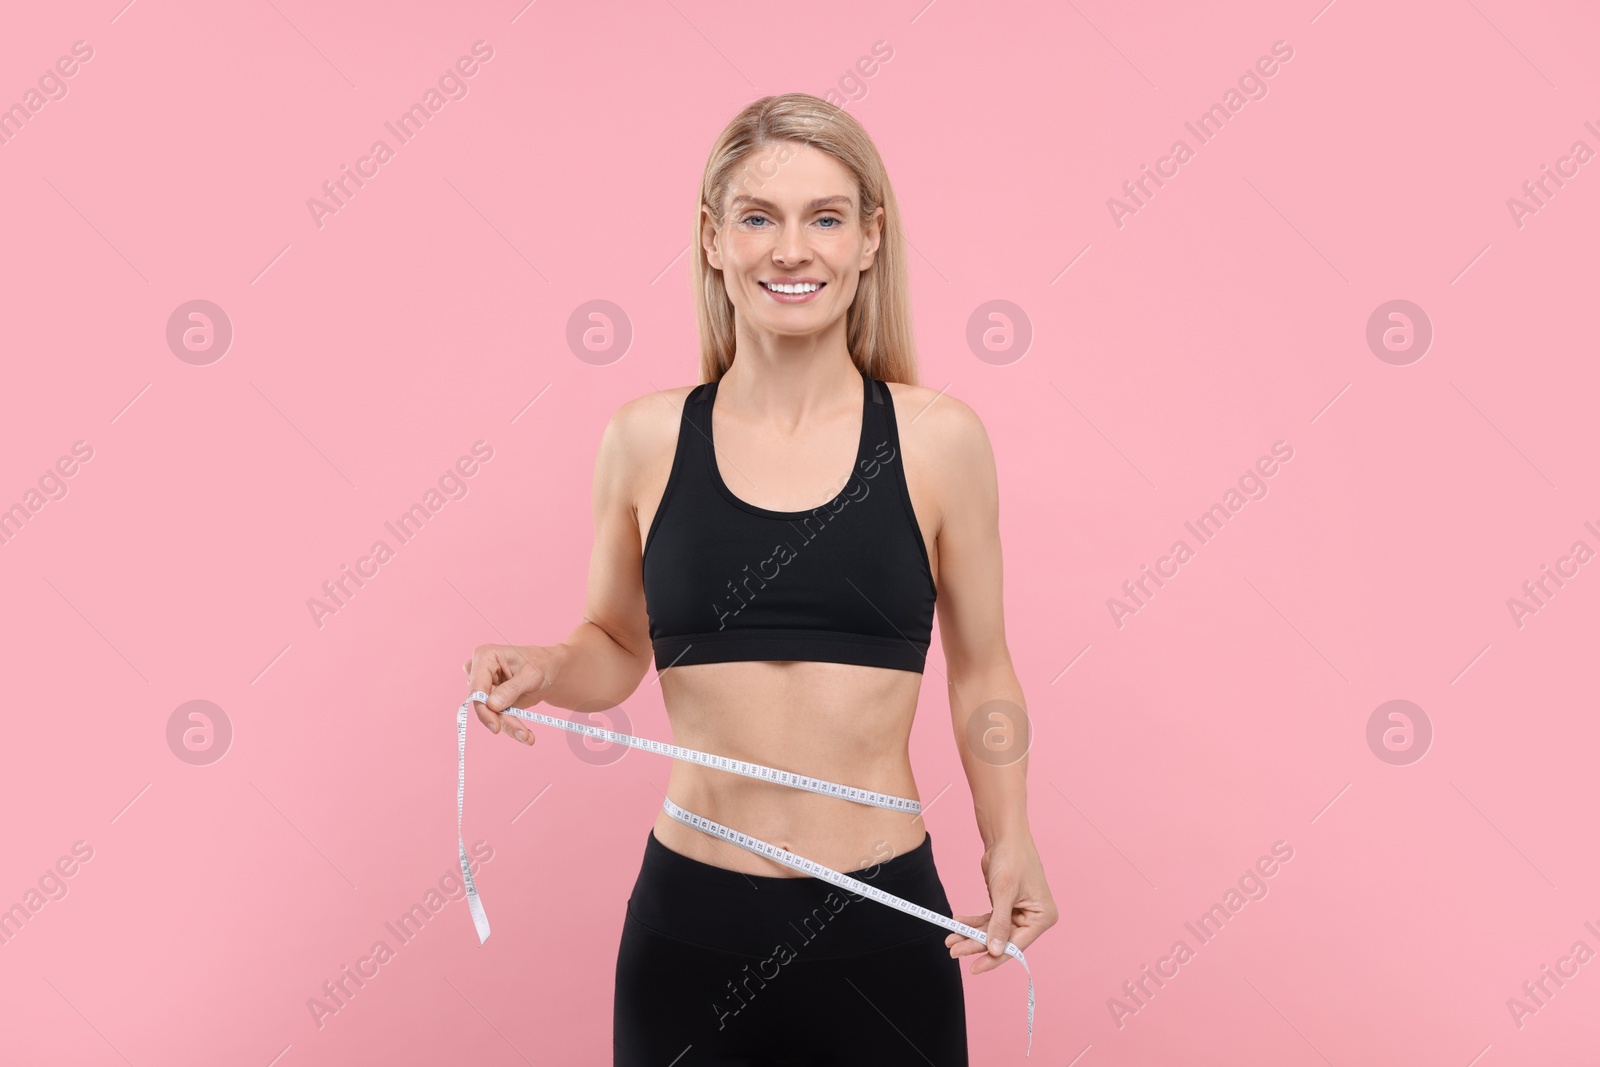 Photo of Slim woman measuring waist with tape on pink background. Weight loss